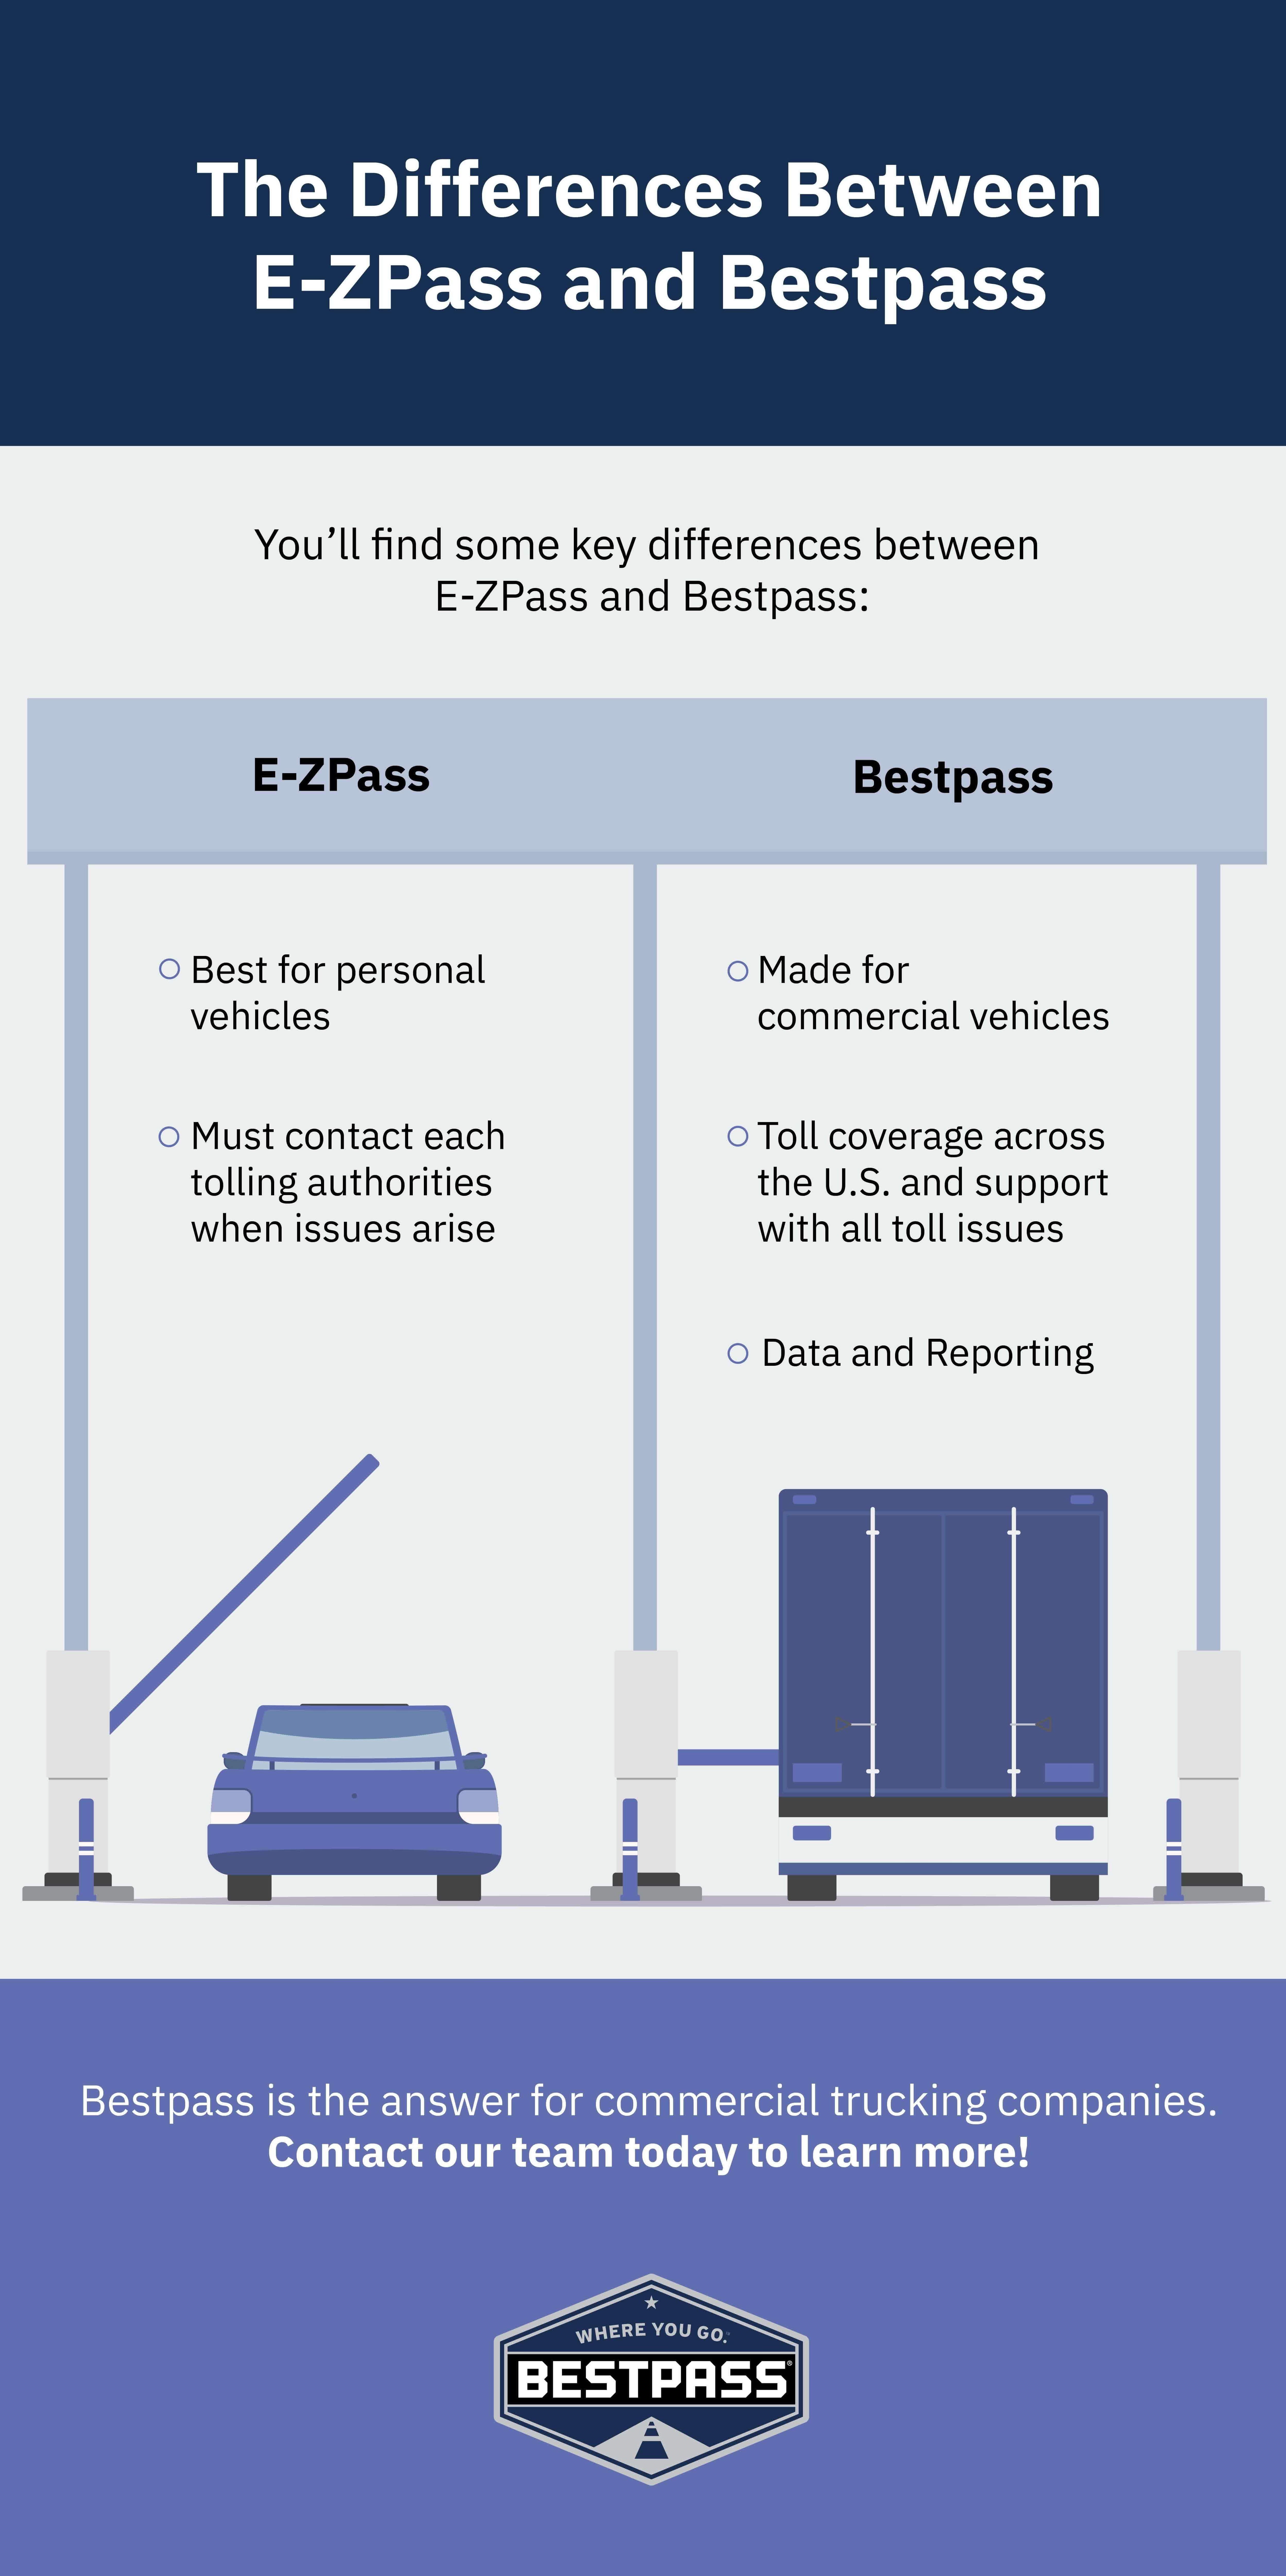 A grey, blue, and purple infographic listing the differences between Bestpass and E-Zpass.